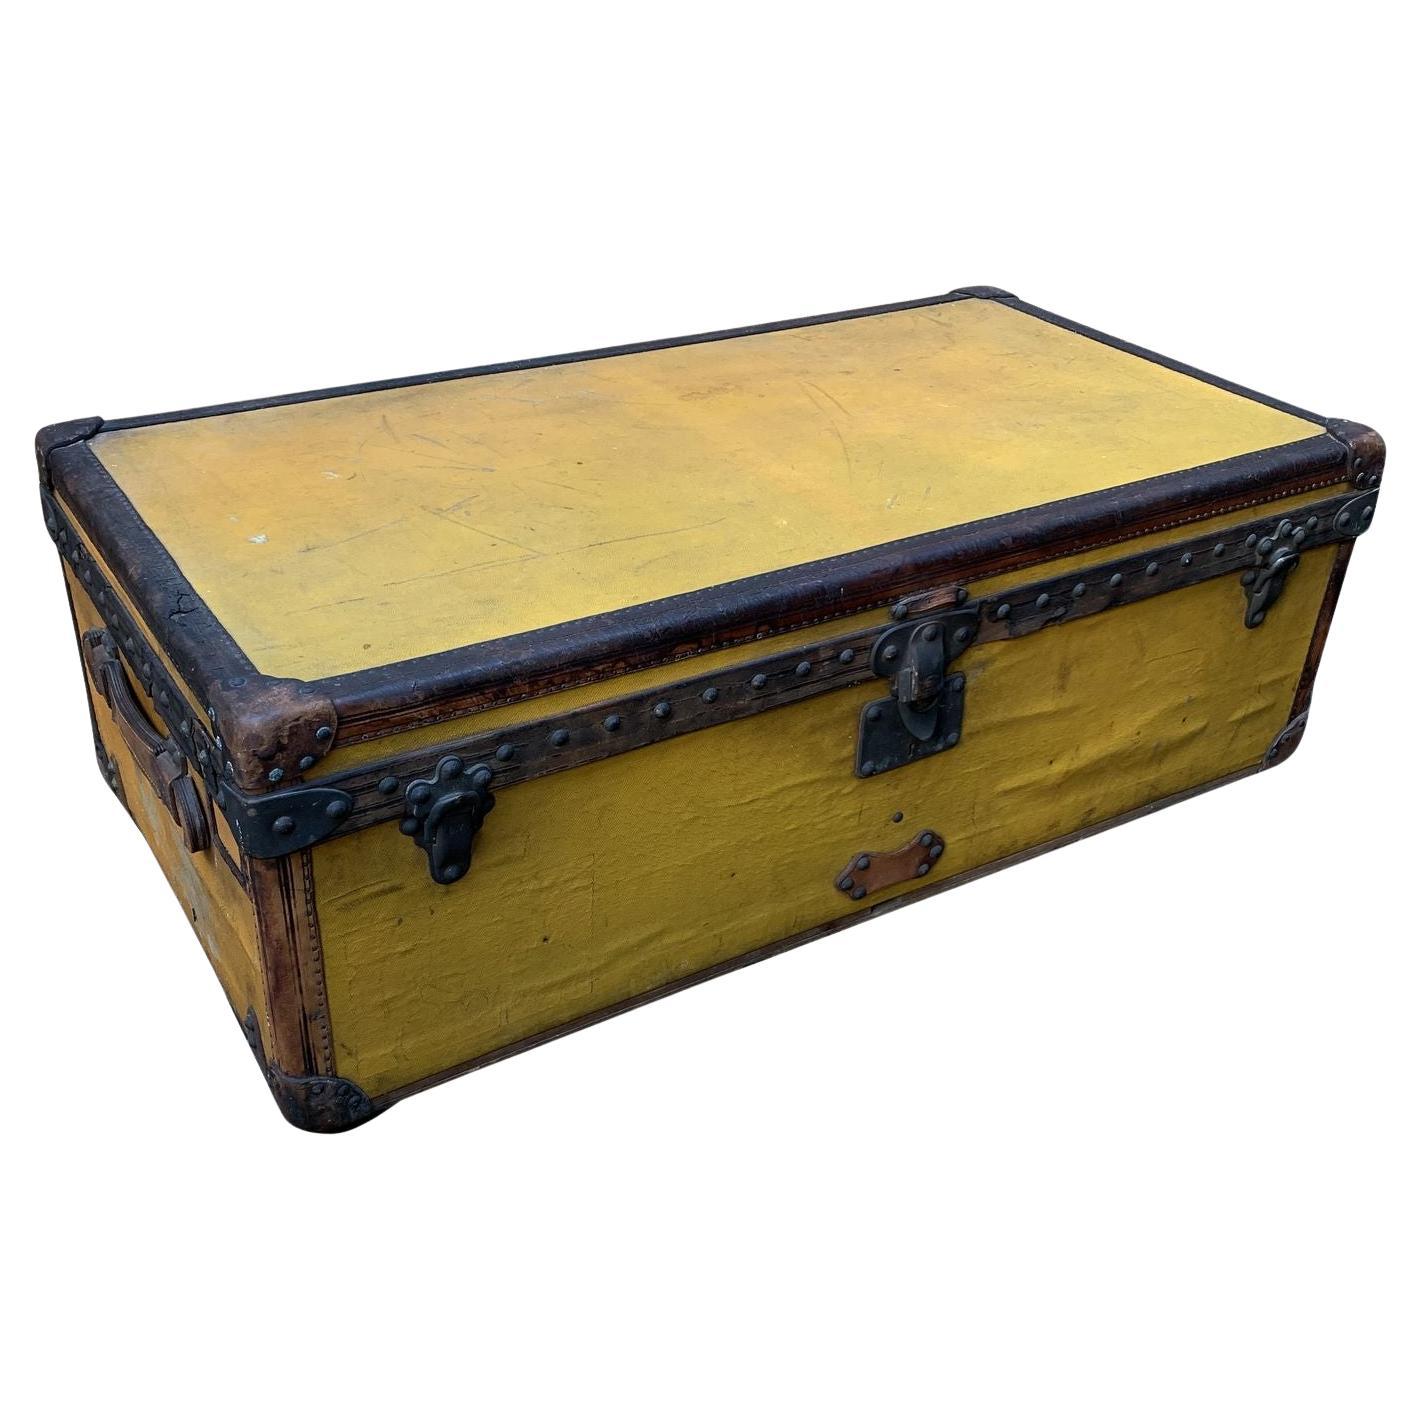 What are steamer trunks worth?